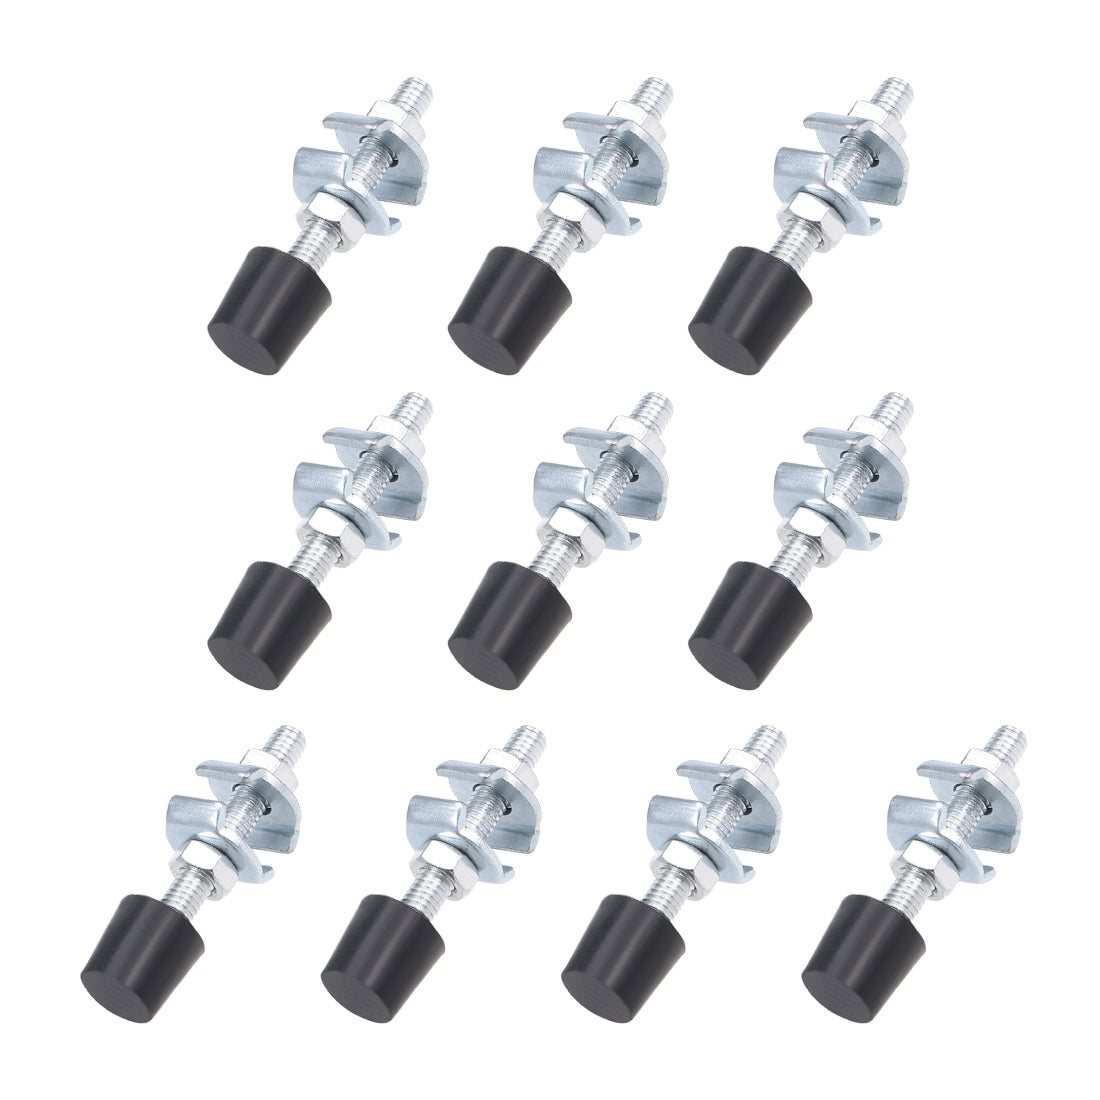 uxcell Uxcell M6x54mm Carbon Steel Toggle Clamp Screw Assembly with Rounded Spindle Tip 10pcs